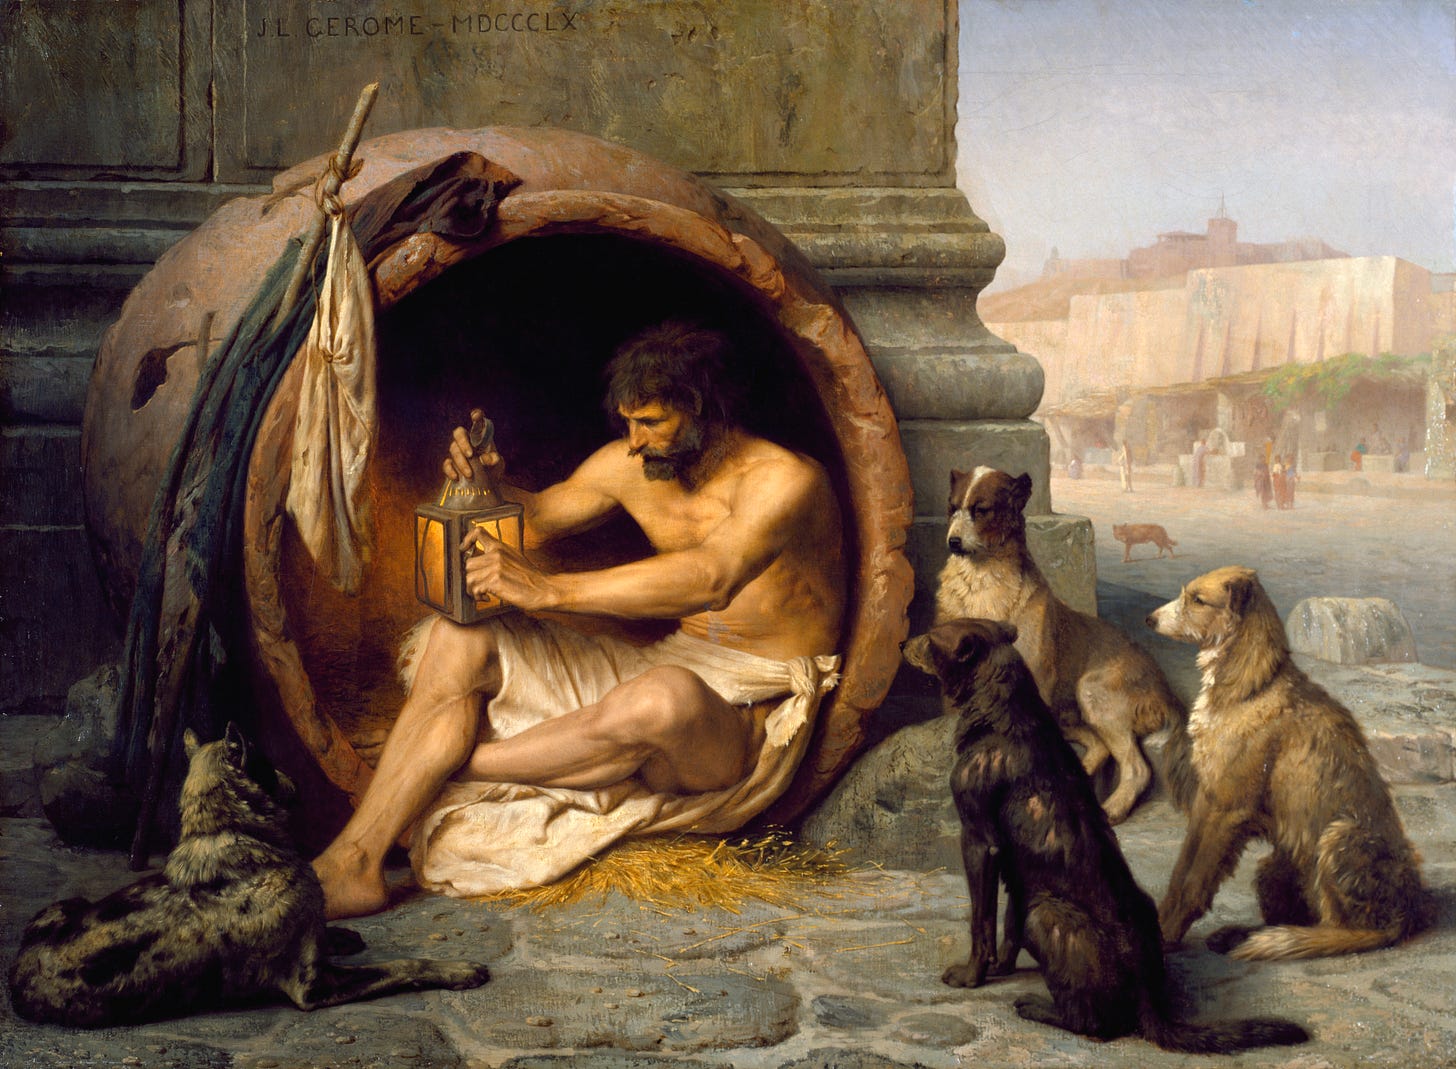 Painting of Diogenes, stoic philosopher, living in a barrel.